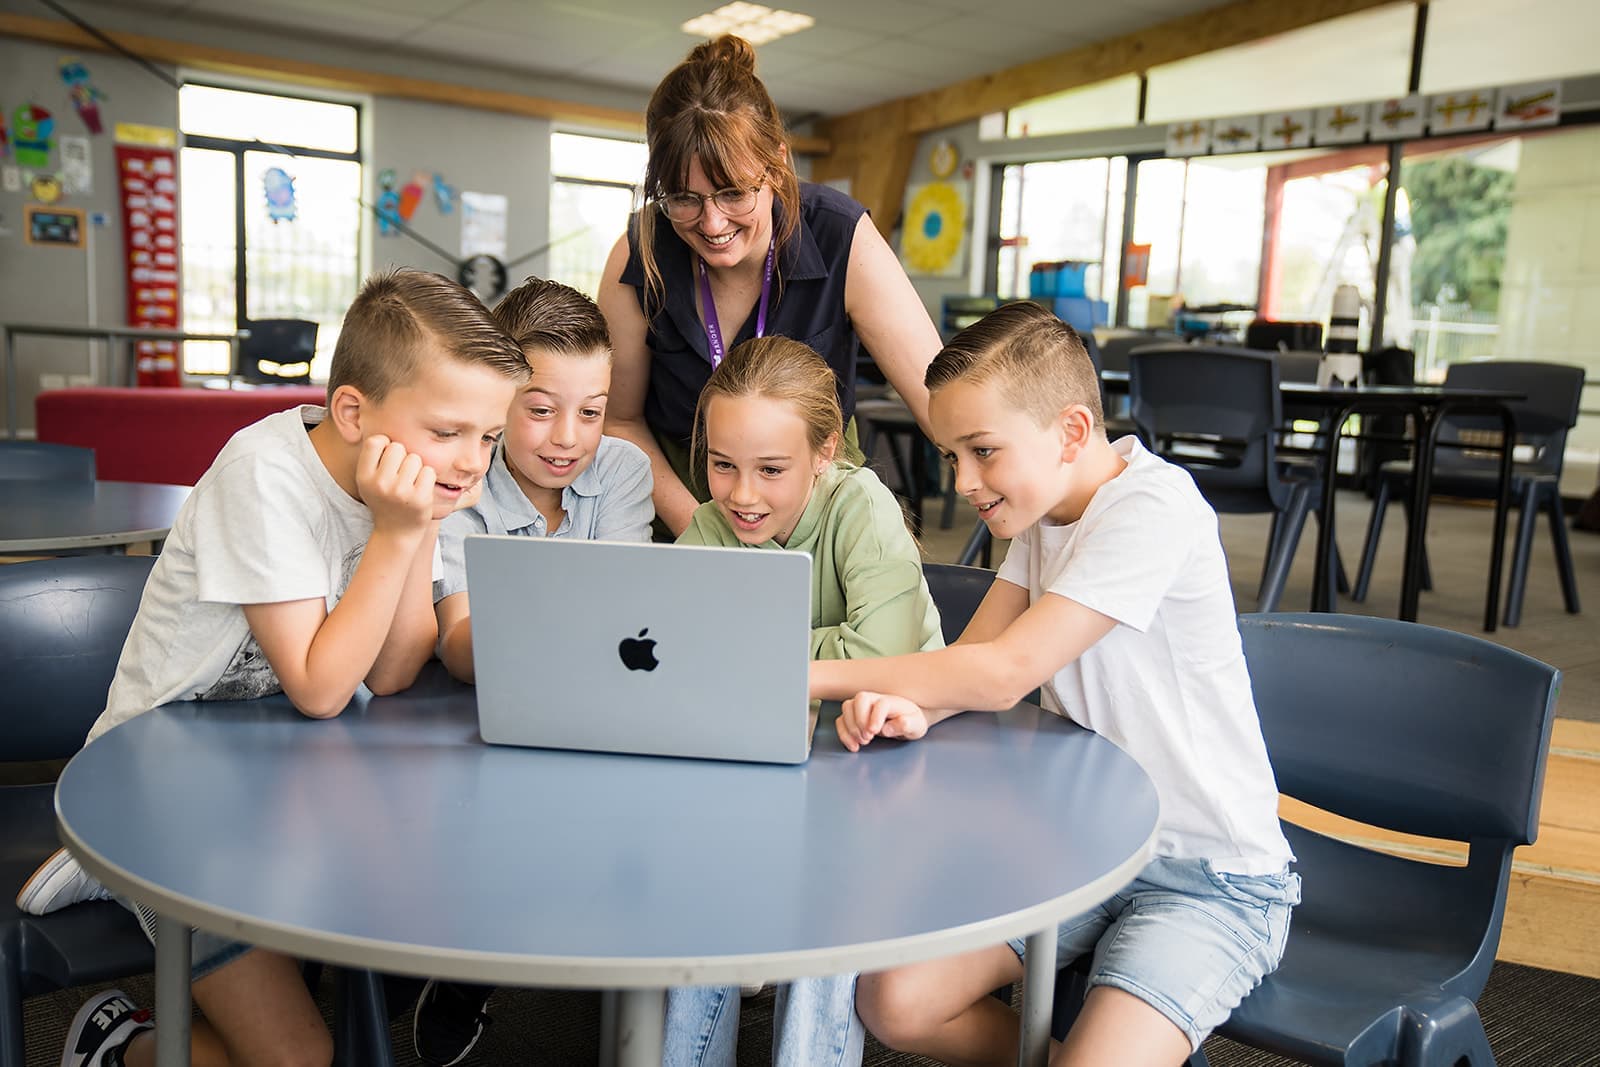 A group of four primary school students seated at a table and working together on a laptop. Behind them a teacher is supervising.